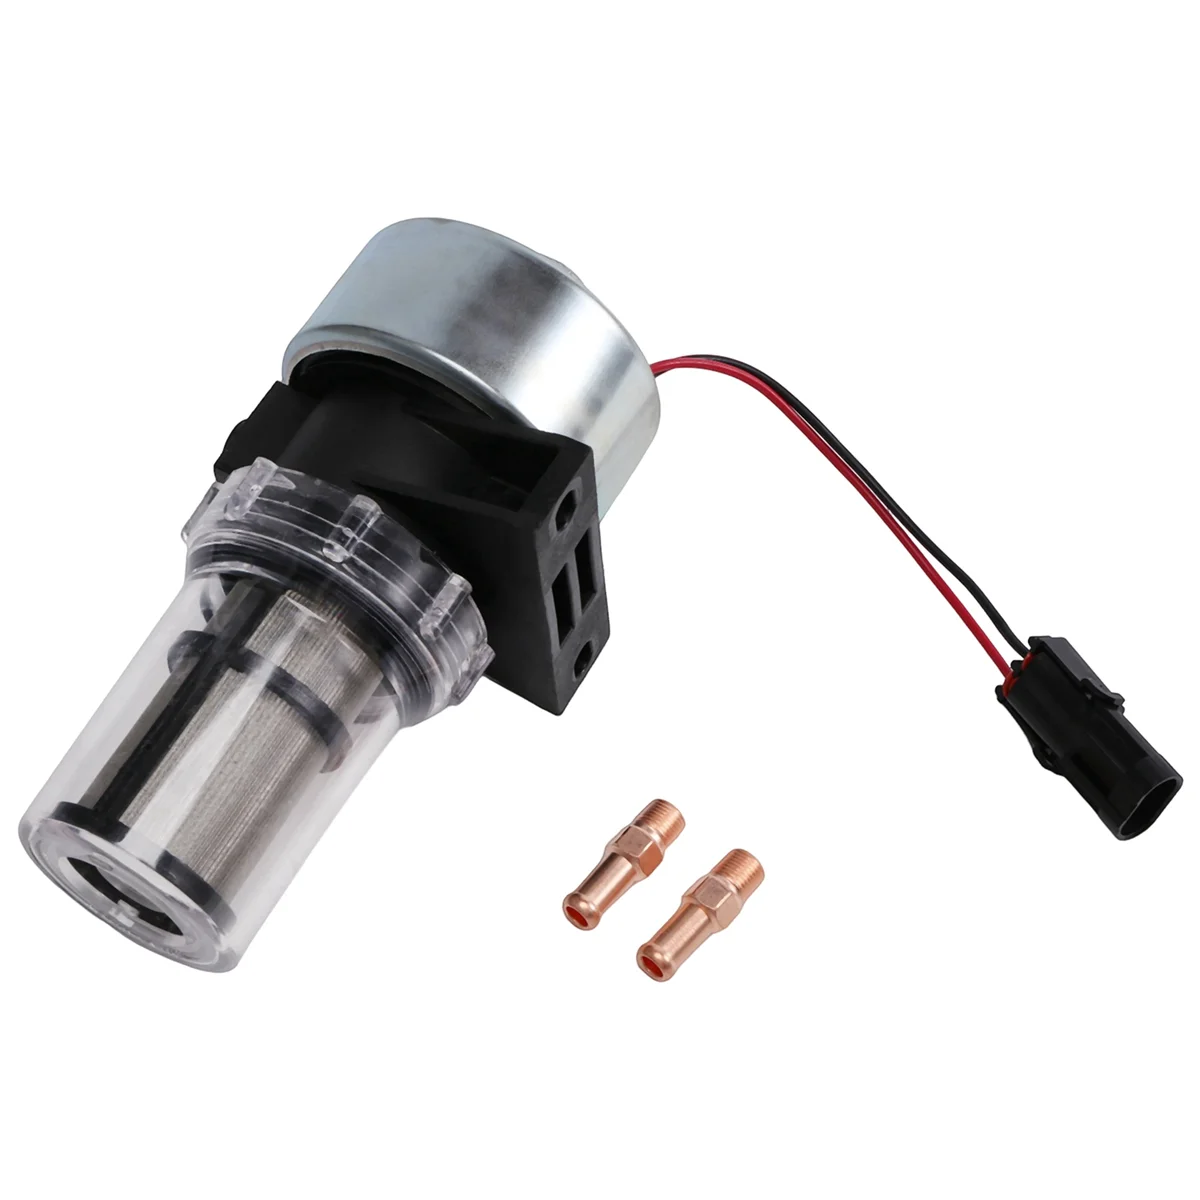 

Filter Fuel Pump for Thermo King MD/KD/RD/TS/URD/XDS/TD/LND Replace Carrier Fuel Pump 30-01108-03 300110803 417059 30-01108-01SV